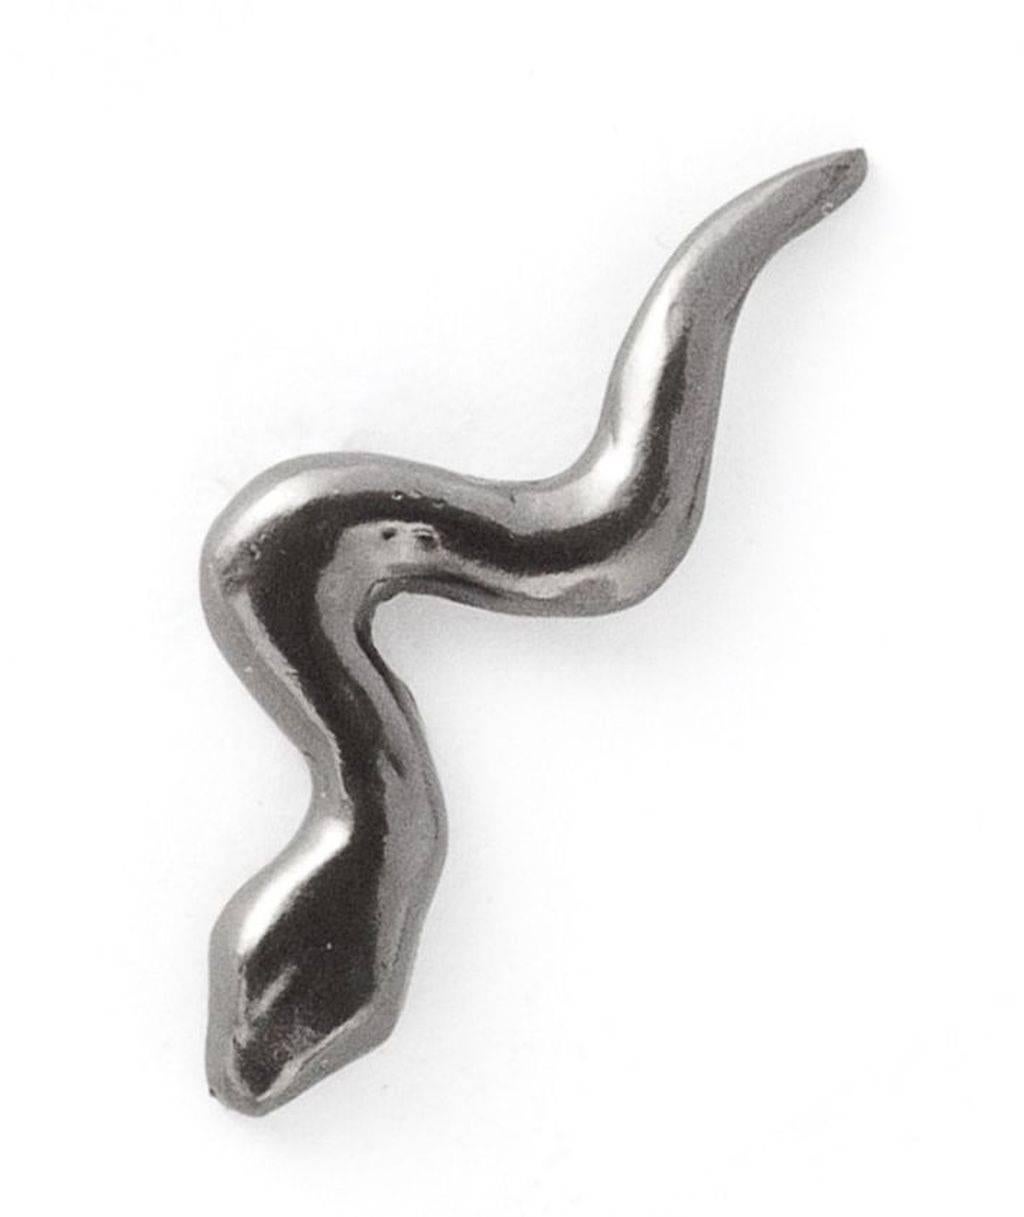 Giulia Barela's Ribbon earrings

A small snake plays with an ear, caught in mid air, capturing pure movement.

Stud earrings
Material: 925 silver black rhodium
Measurements: 3,5x1,2 cm
Weight: 3,4 gr. each